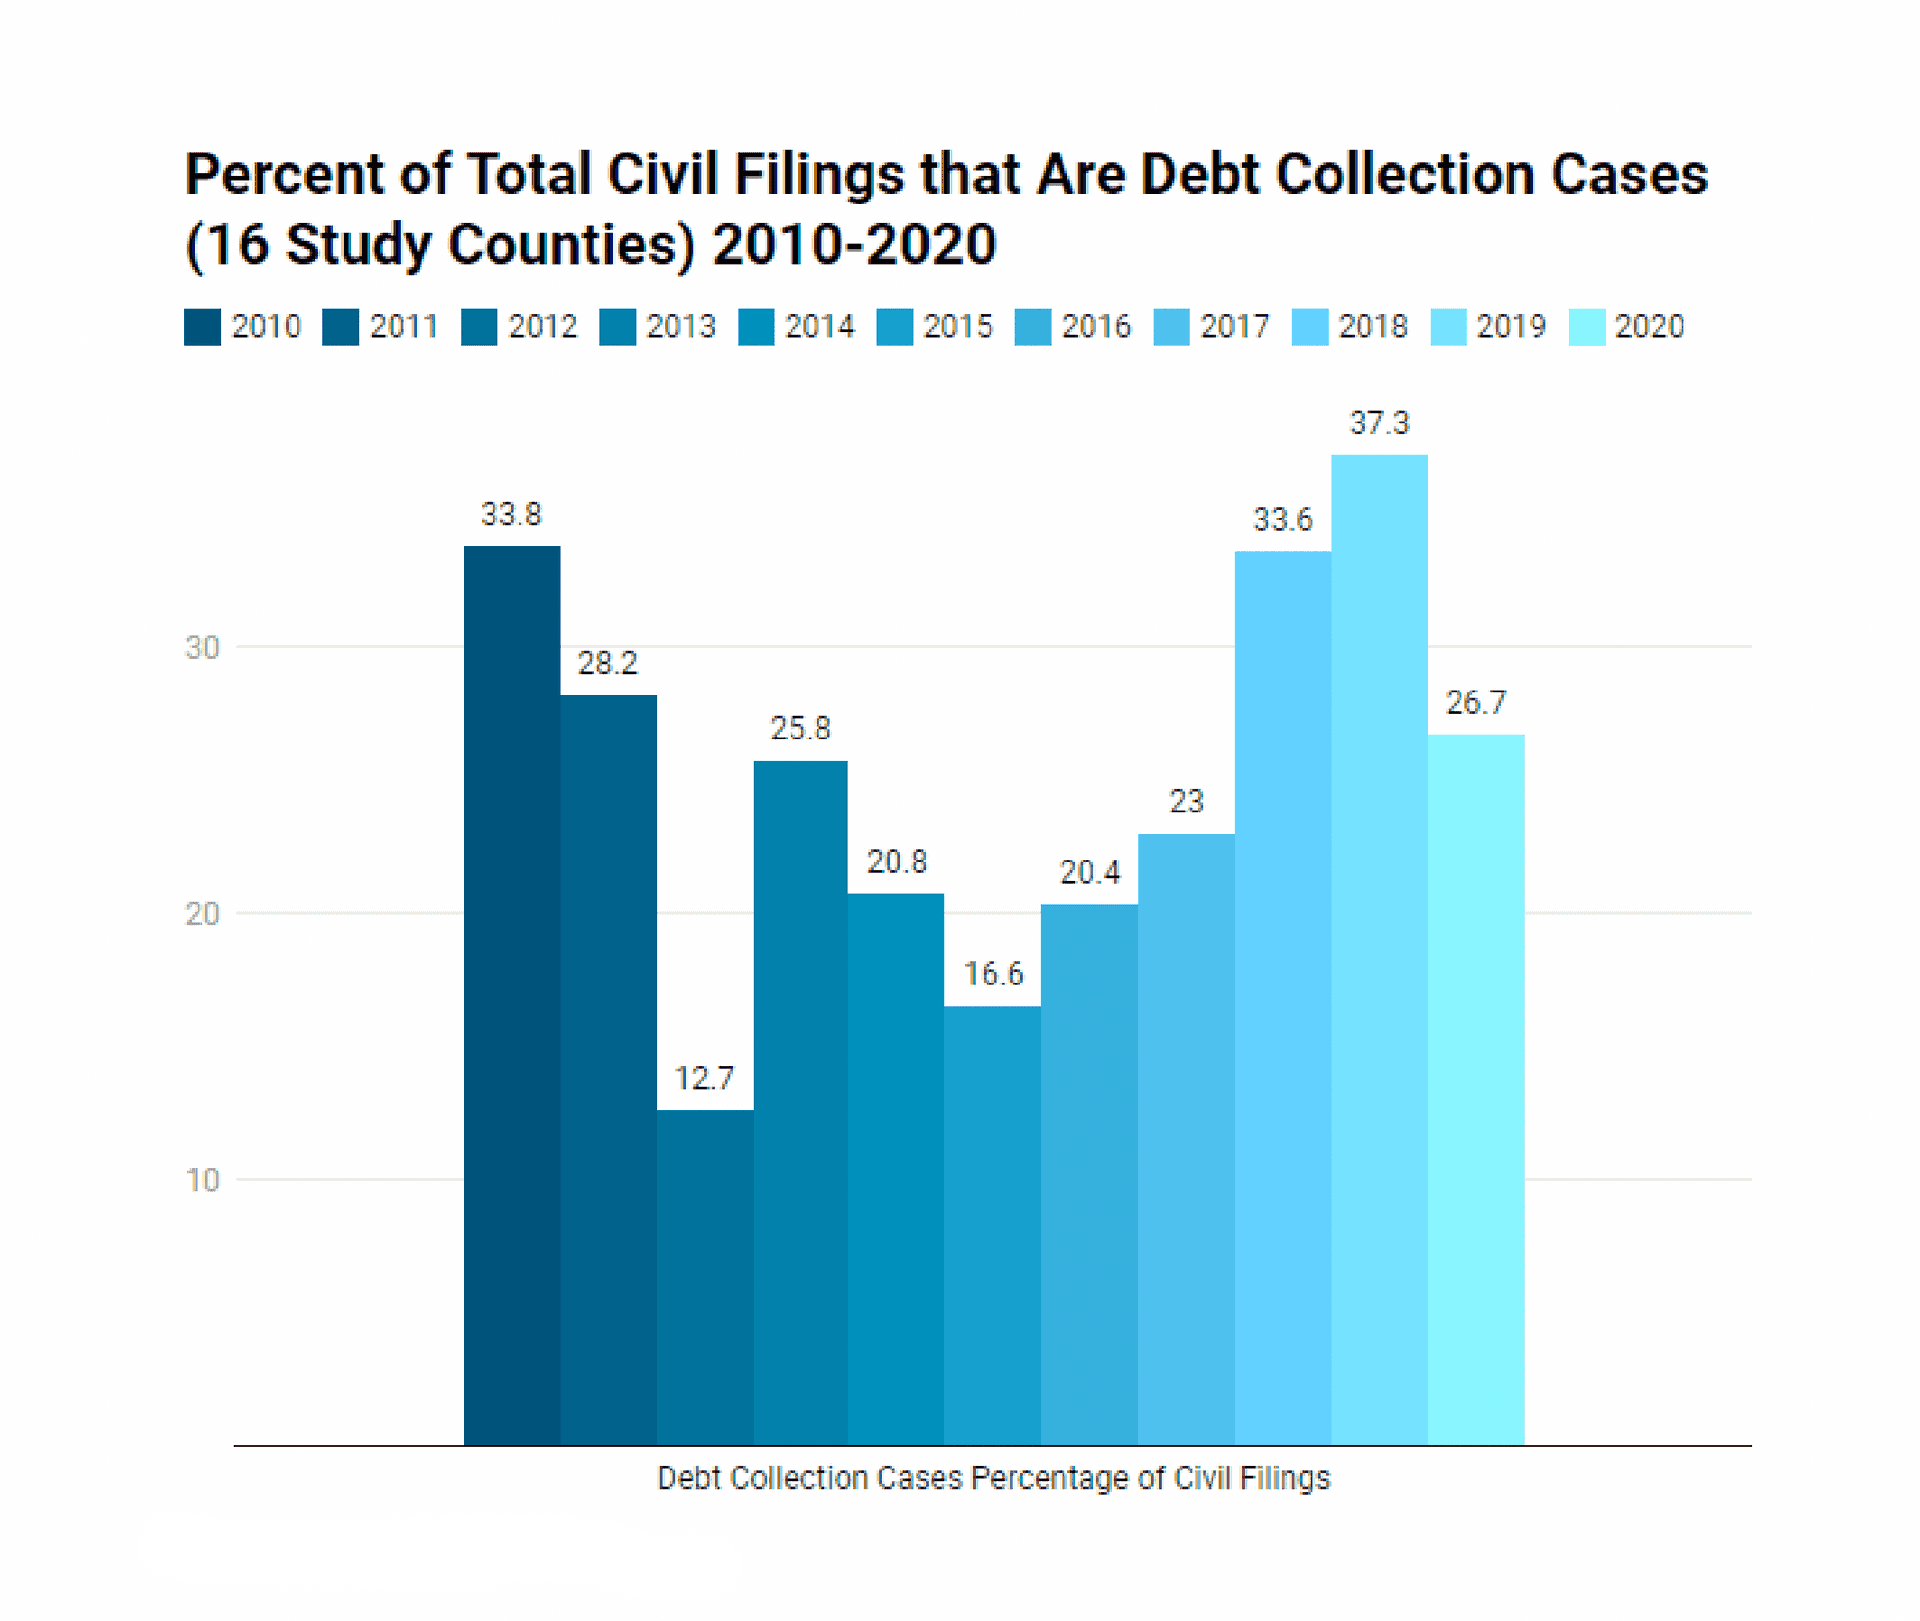 debt collection cases percentagee of civil filings bar chart